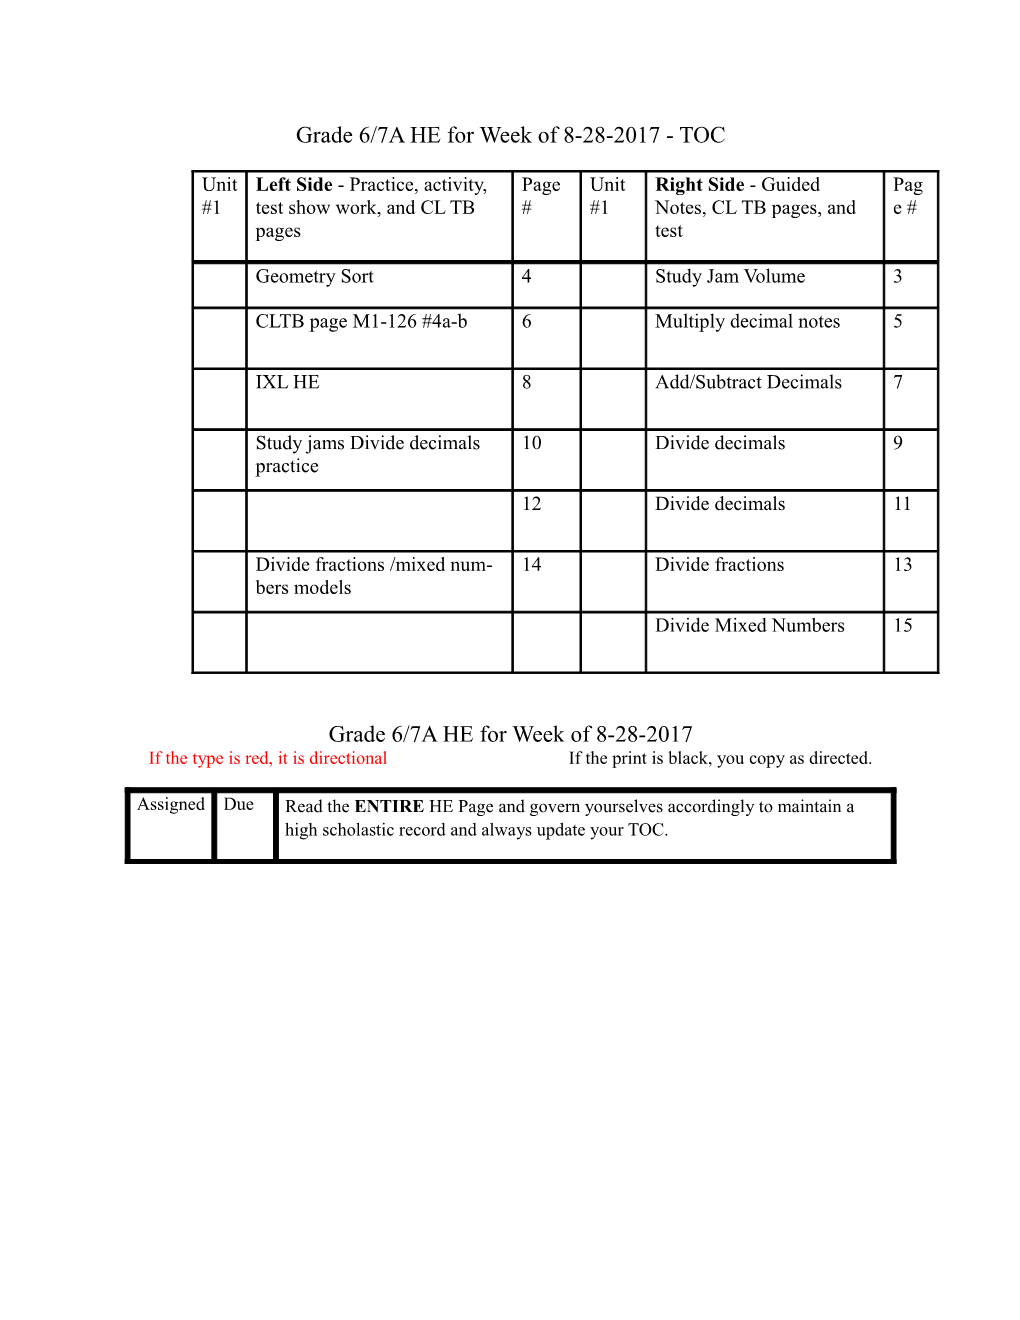 Grade 6/7A HE for Week of 8-28-2017 - TOC